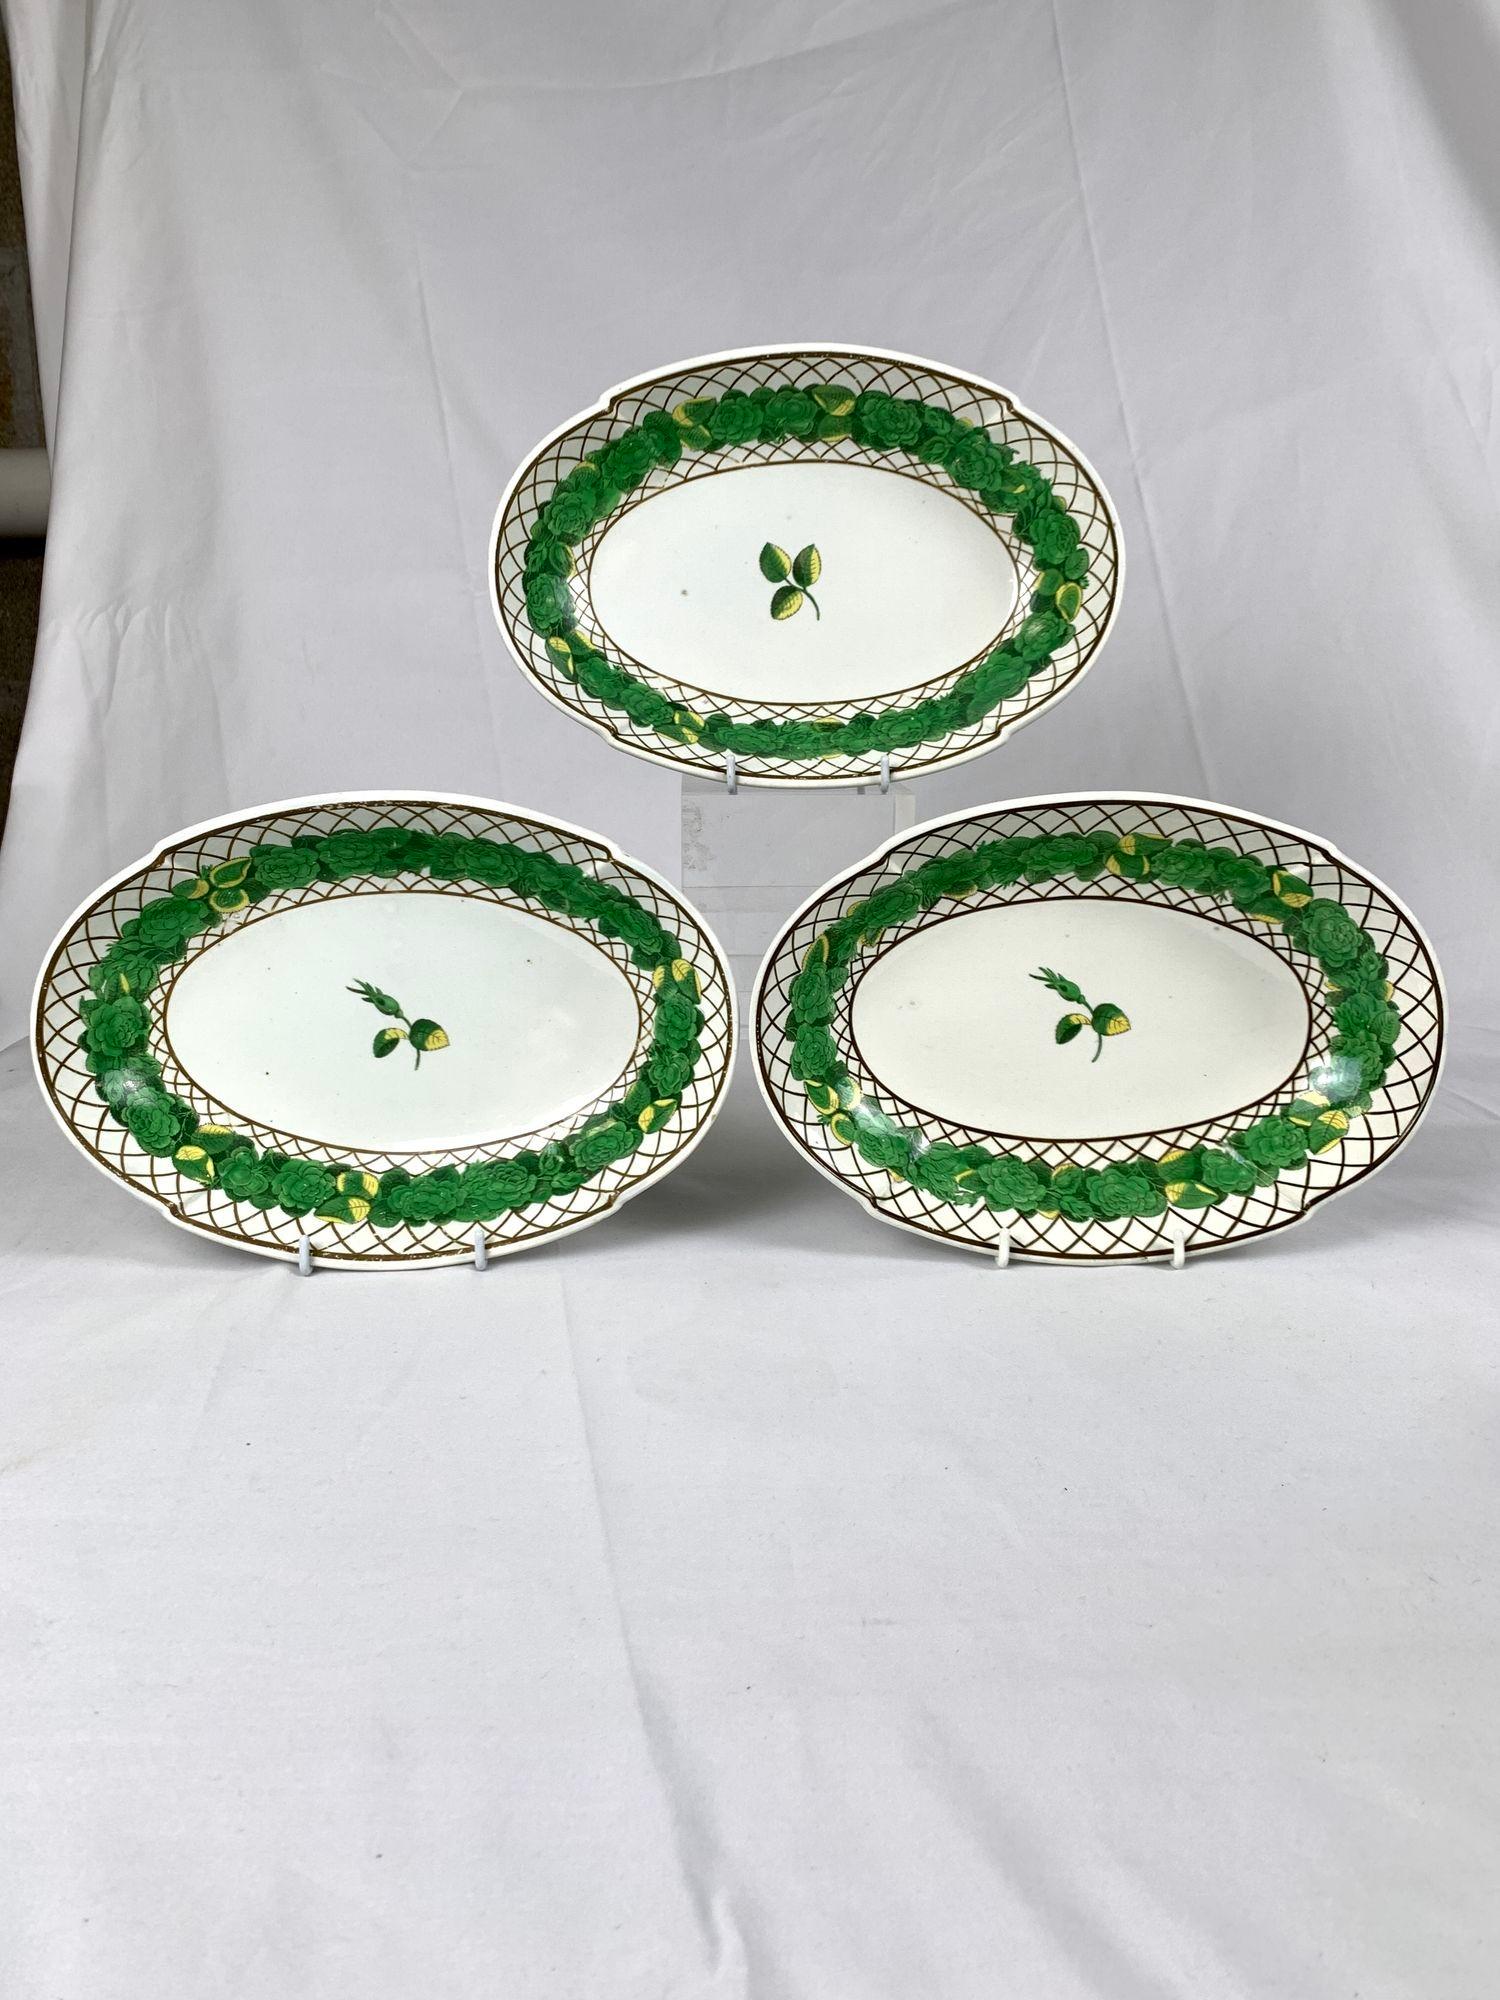 Pearlware Sauce Tureen and Four Oval Serving Dishes by Spode England C-1810 For Sale 4